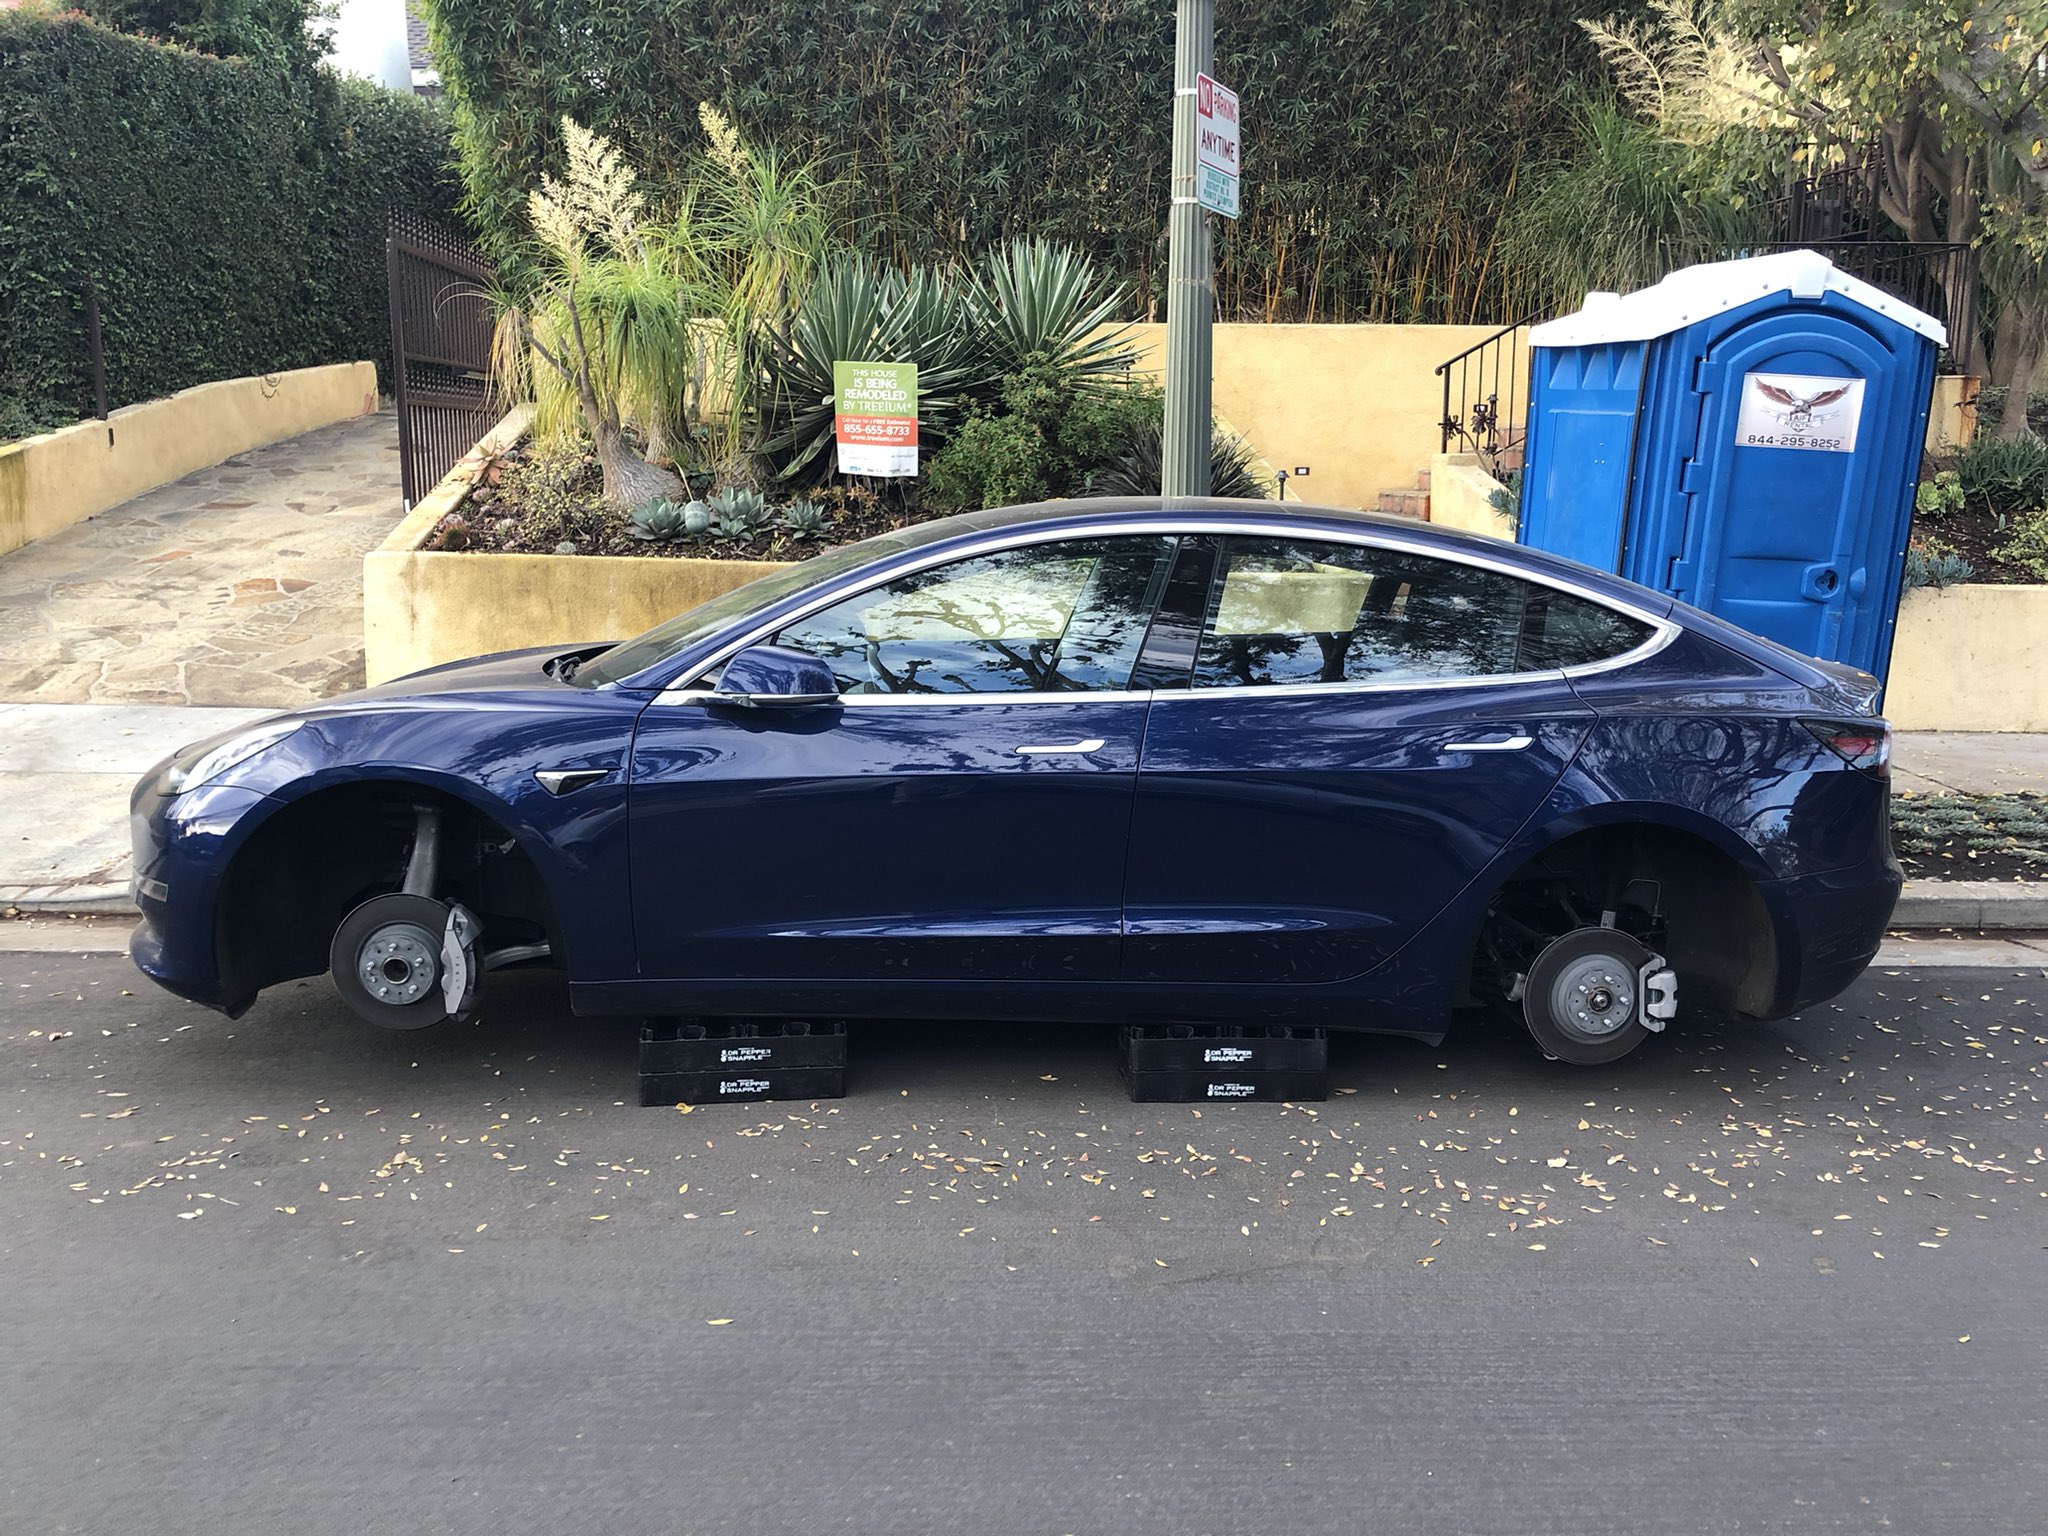 Michael on Twitter: "All 4 wheels stolen off of my @Tesla Model 3 overnight. Have been working for 2 hours to resolve problem with no end in sight. Car cannot be